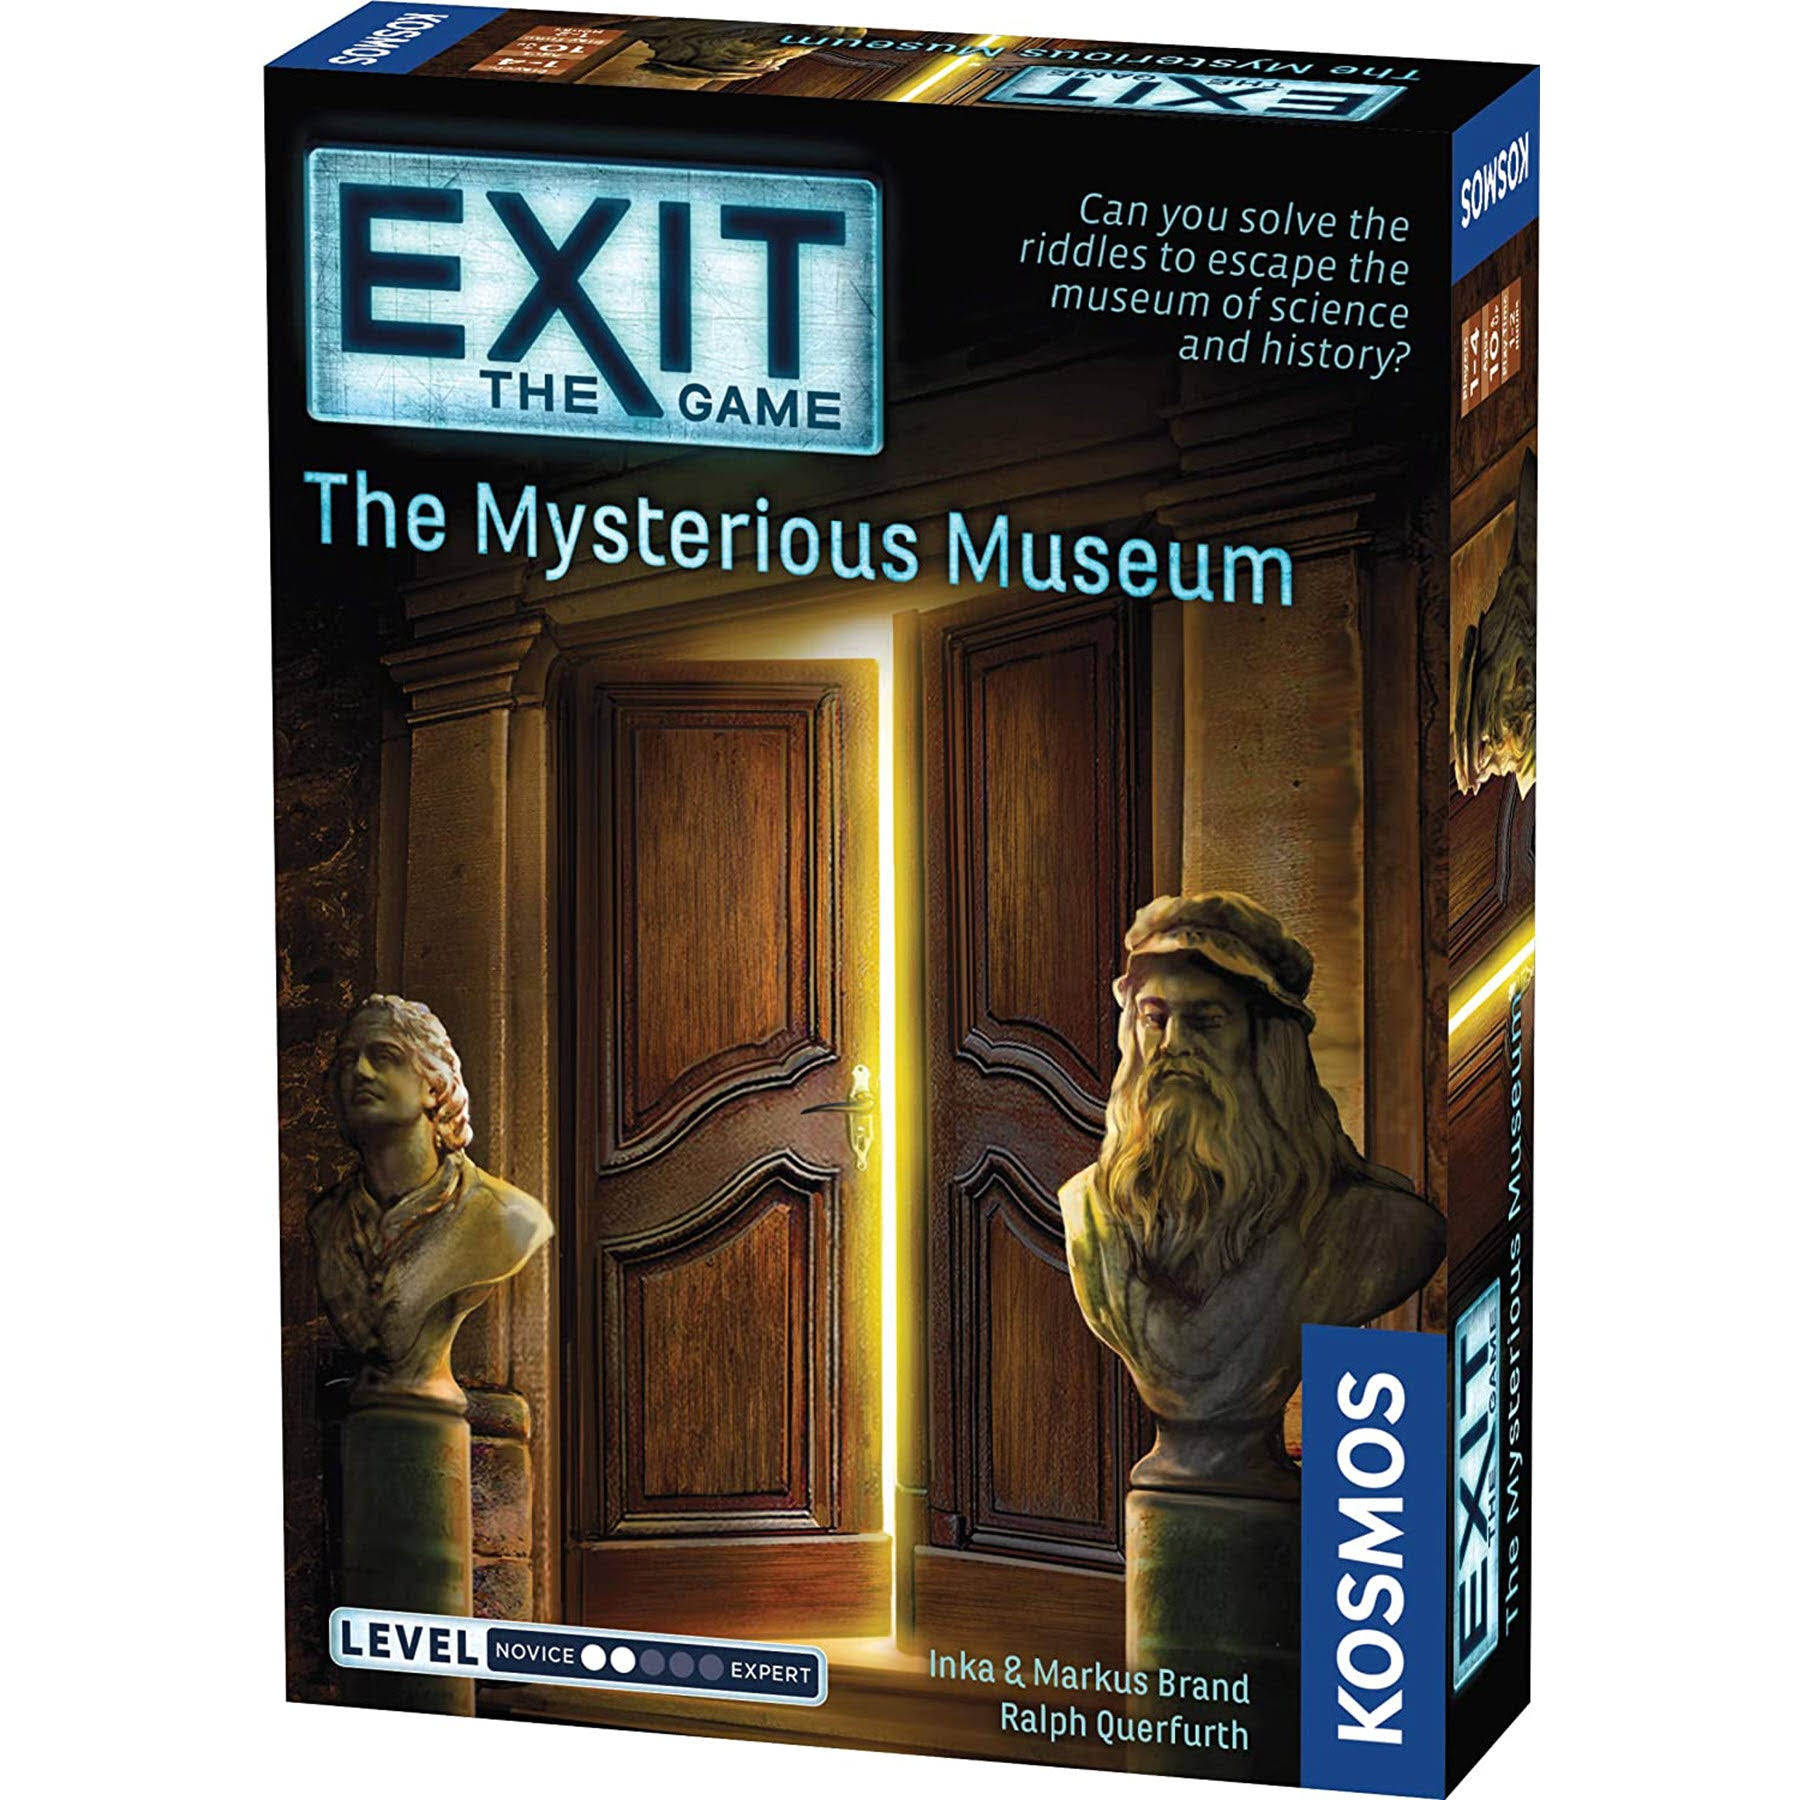 Exit The Game - The Mysterious Museum